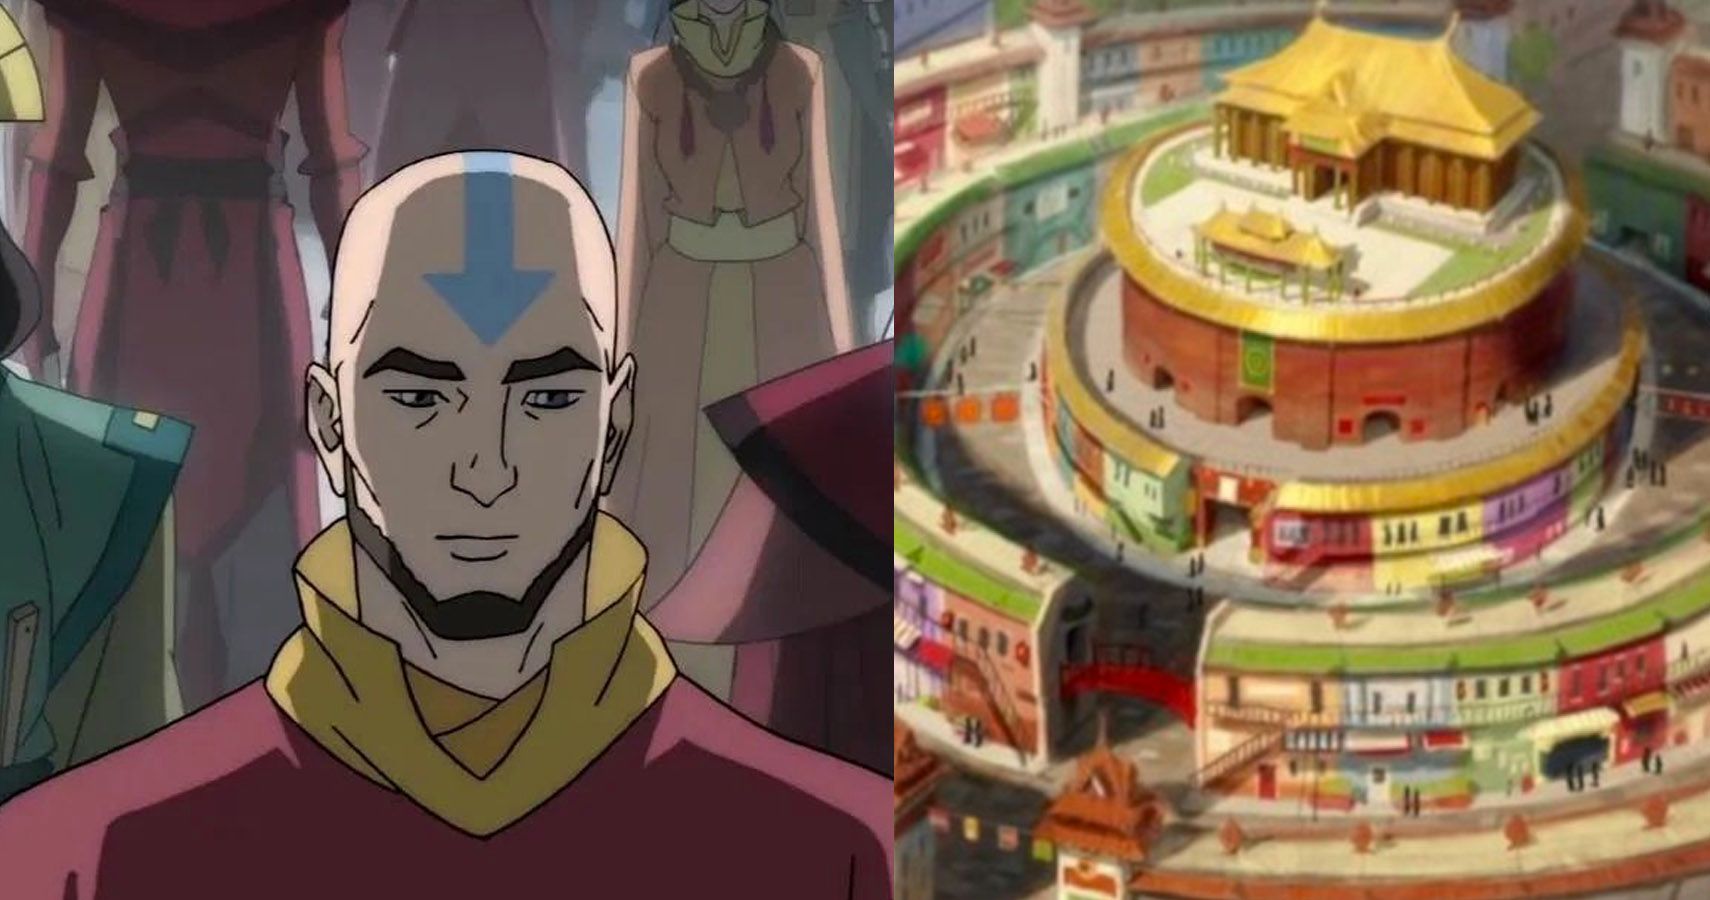 10 Secrets You Missed About The Earth Kingdom In Avatar: The Last Airbender